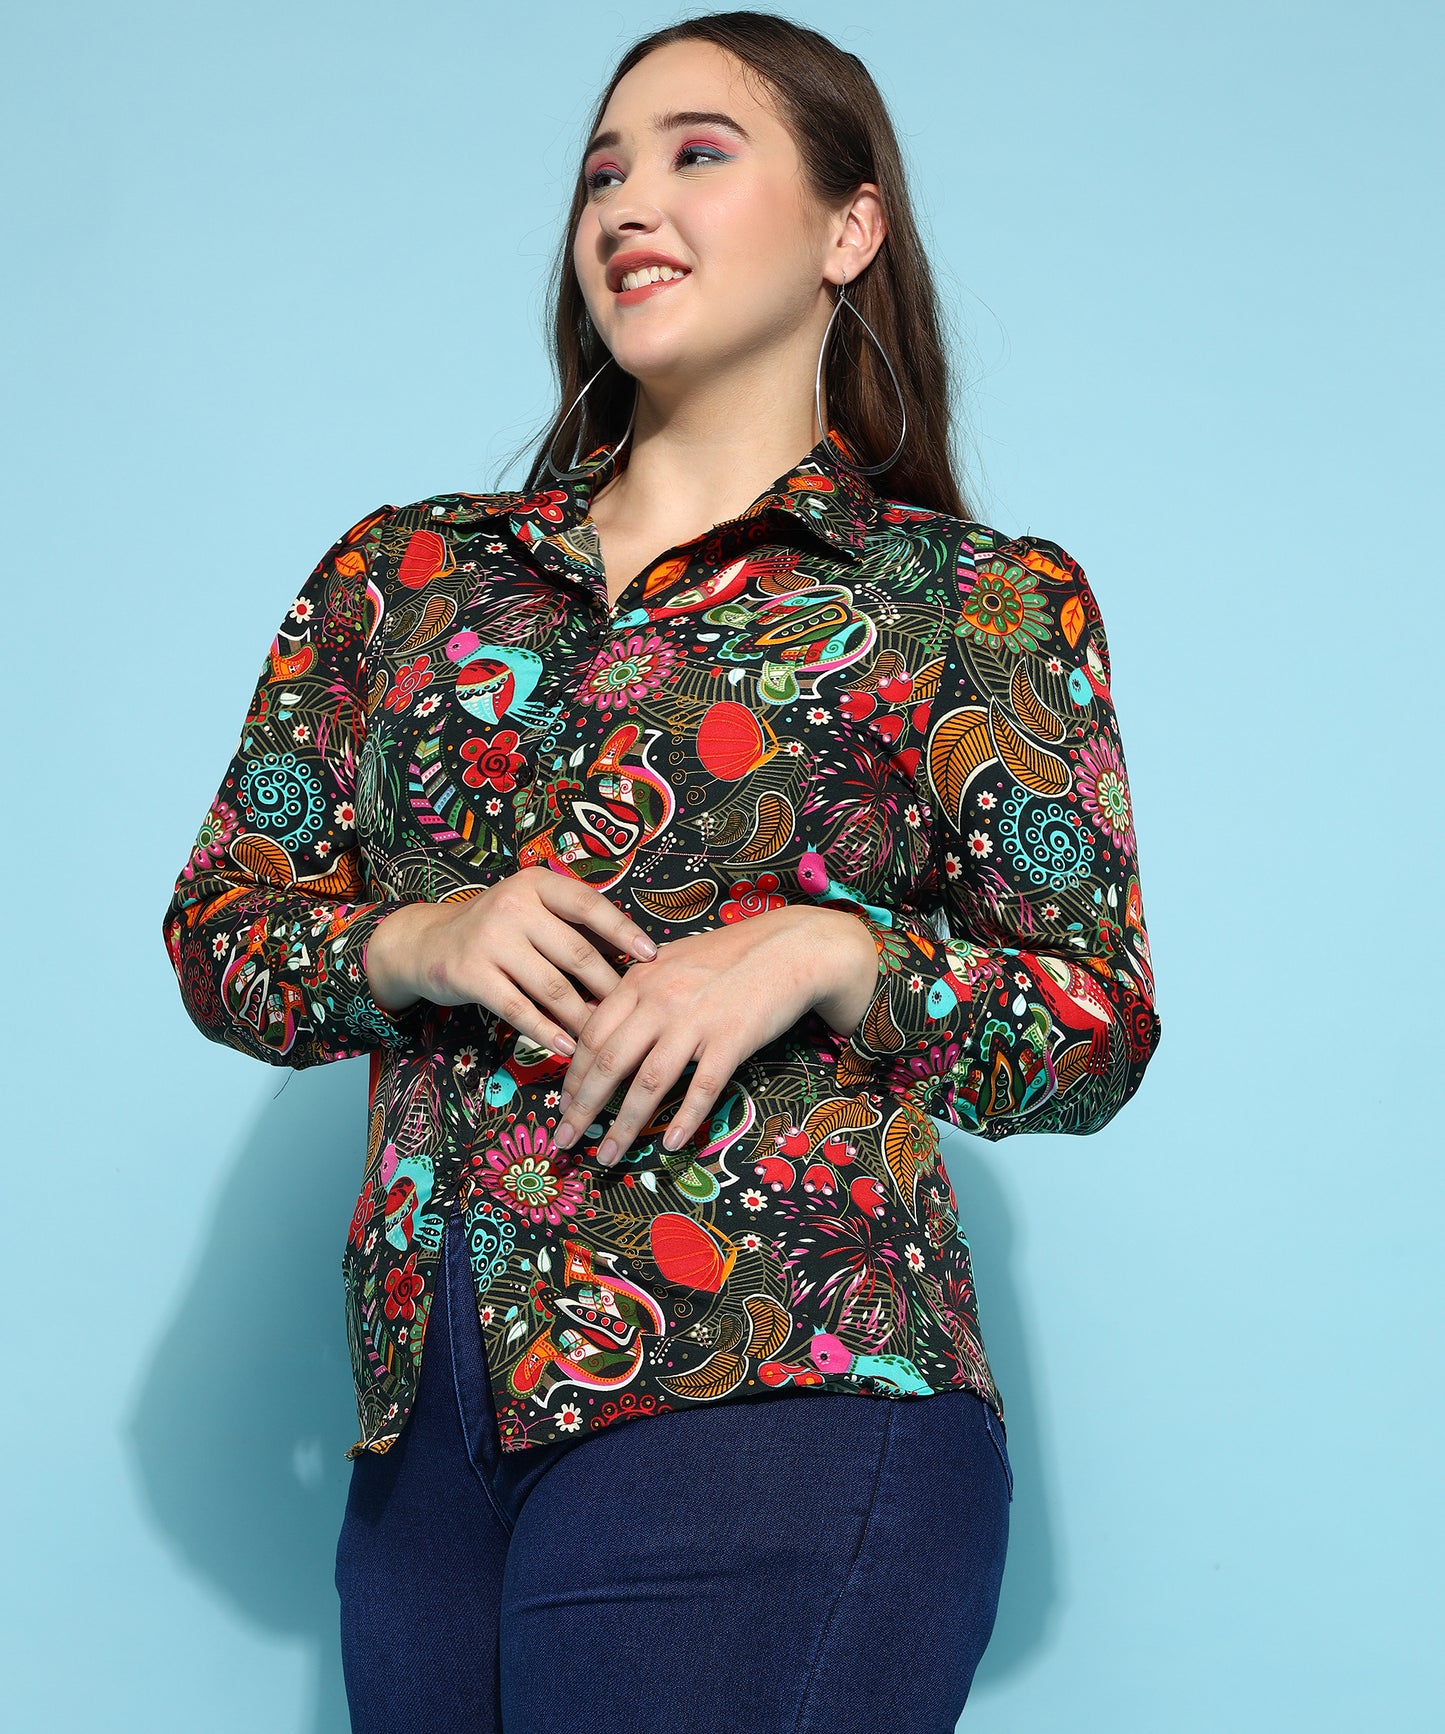 ANUSHIL Printed Women's Casual Shirt - Stylish Floral Print, Regular Fit, and Comfortable Cotton Fabric with Puff Sleeves